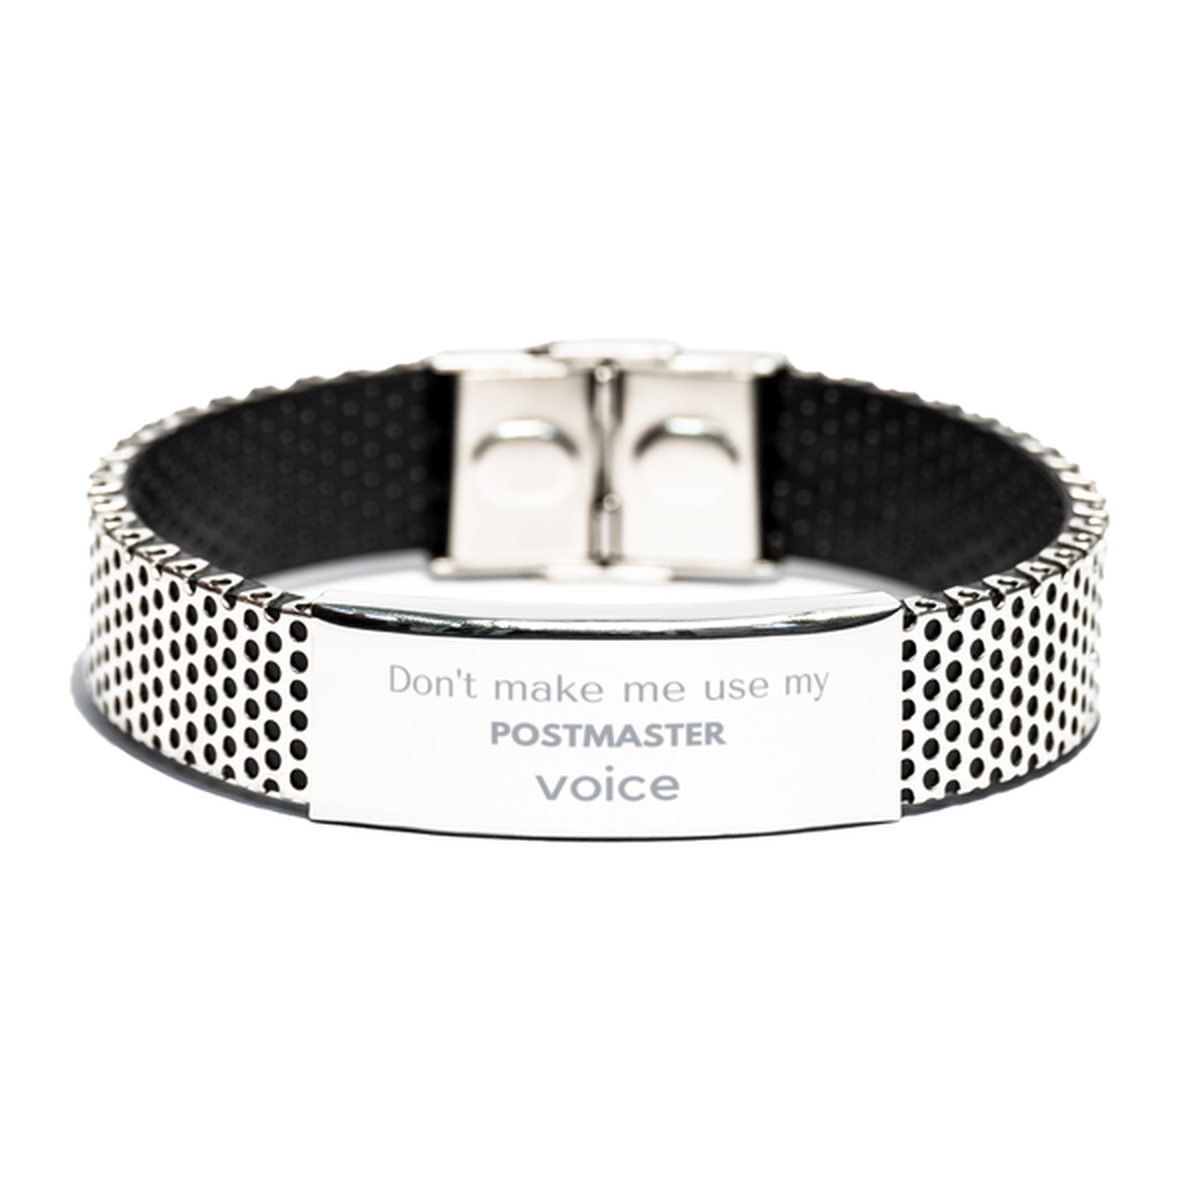 Don't make me use my Postmaster voice, Sarcasm Postmaster Gifts, Christmas Postmaster Stainless Steel Bracelet Birthday Unique Gifts For Postmaster Coworkers, Men, Women, Colleague, Friends